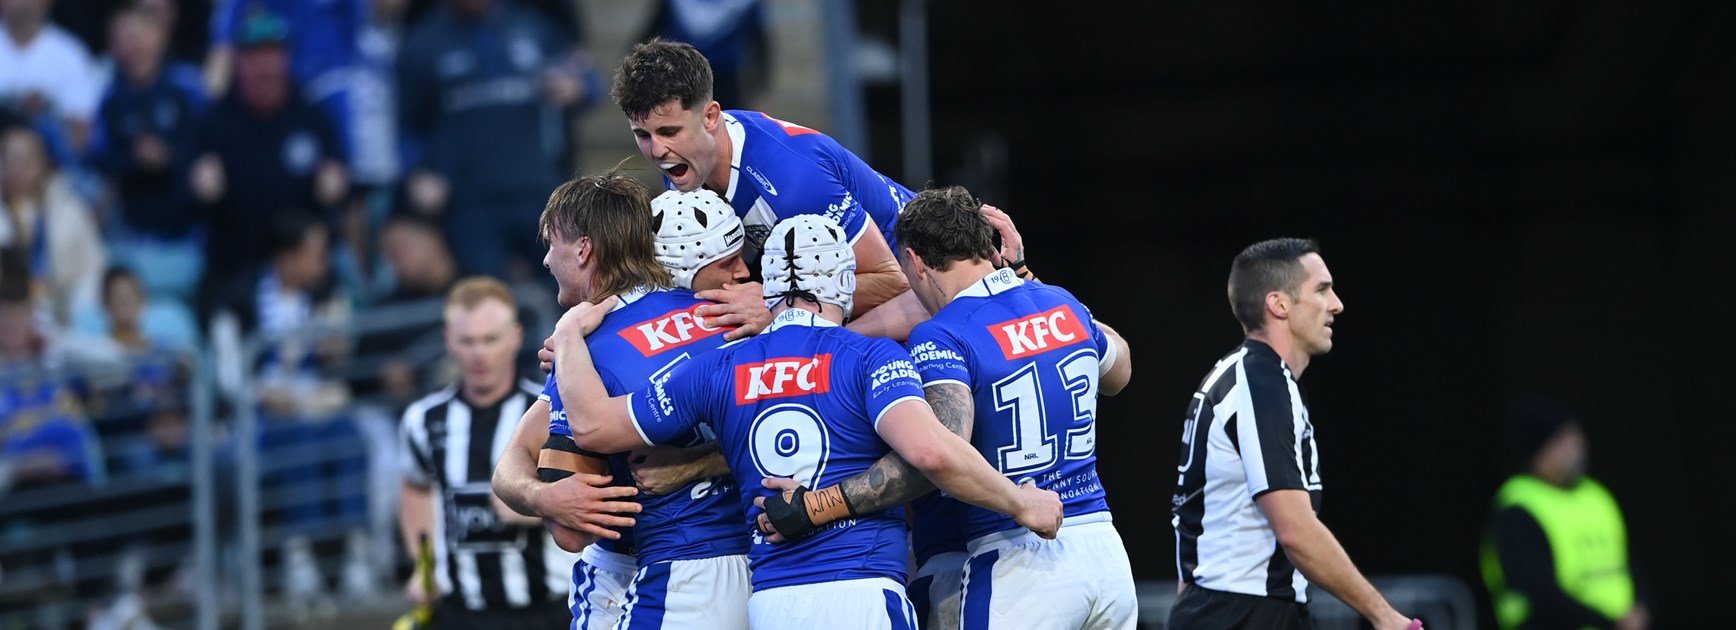 Brave Bulldogs fight back to claim thriller against Eels